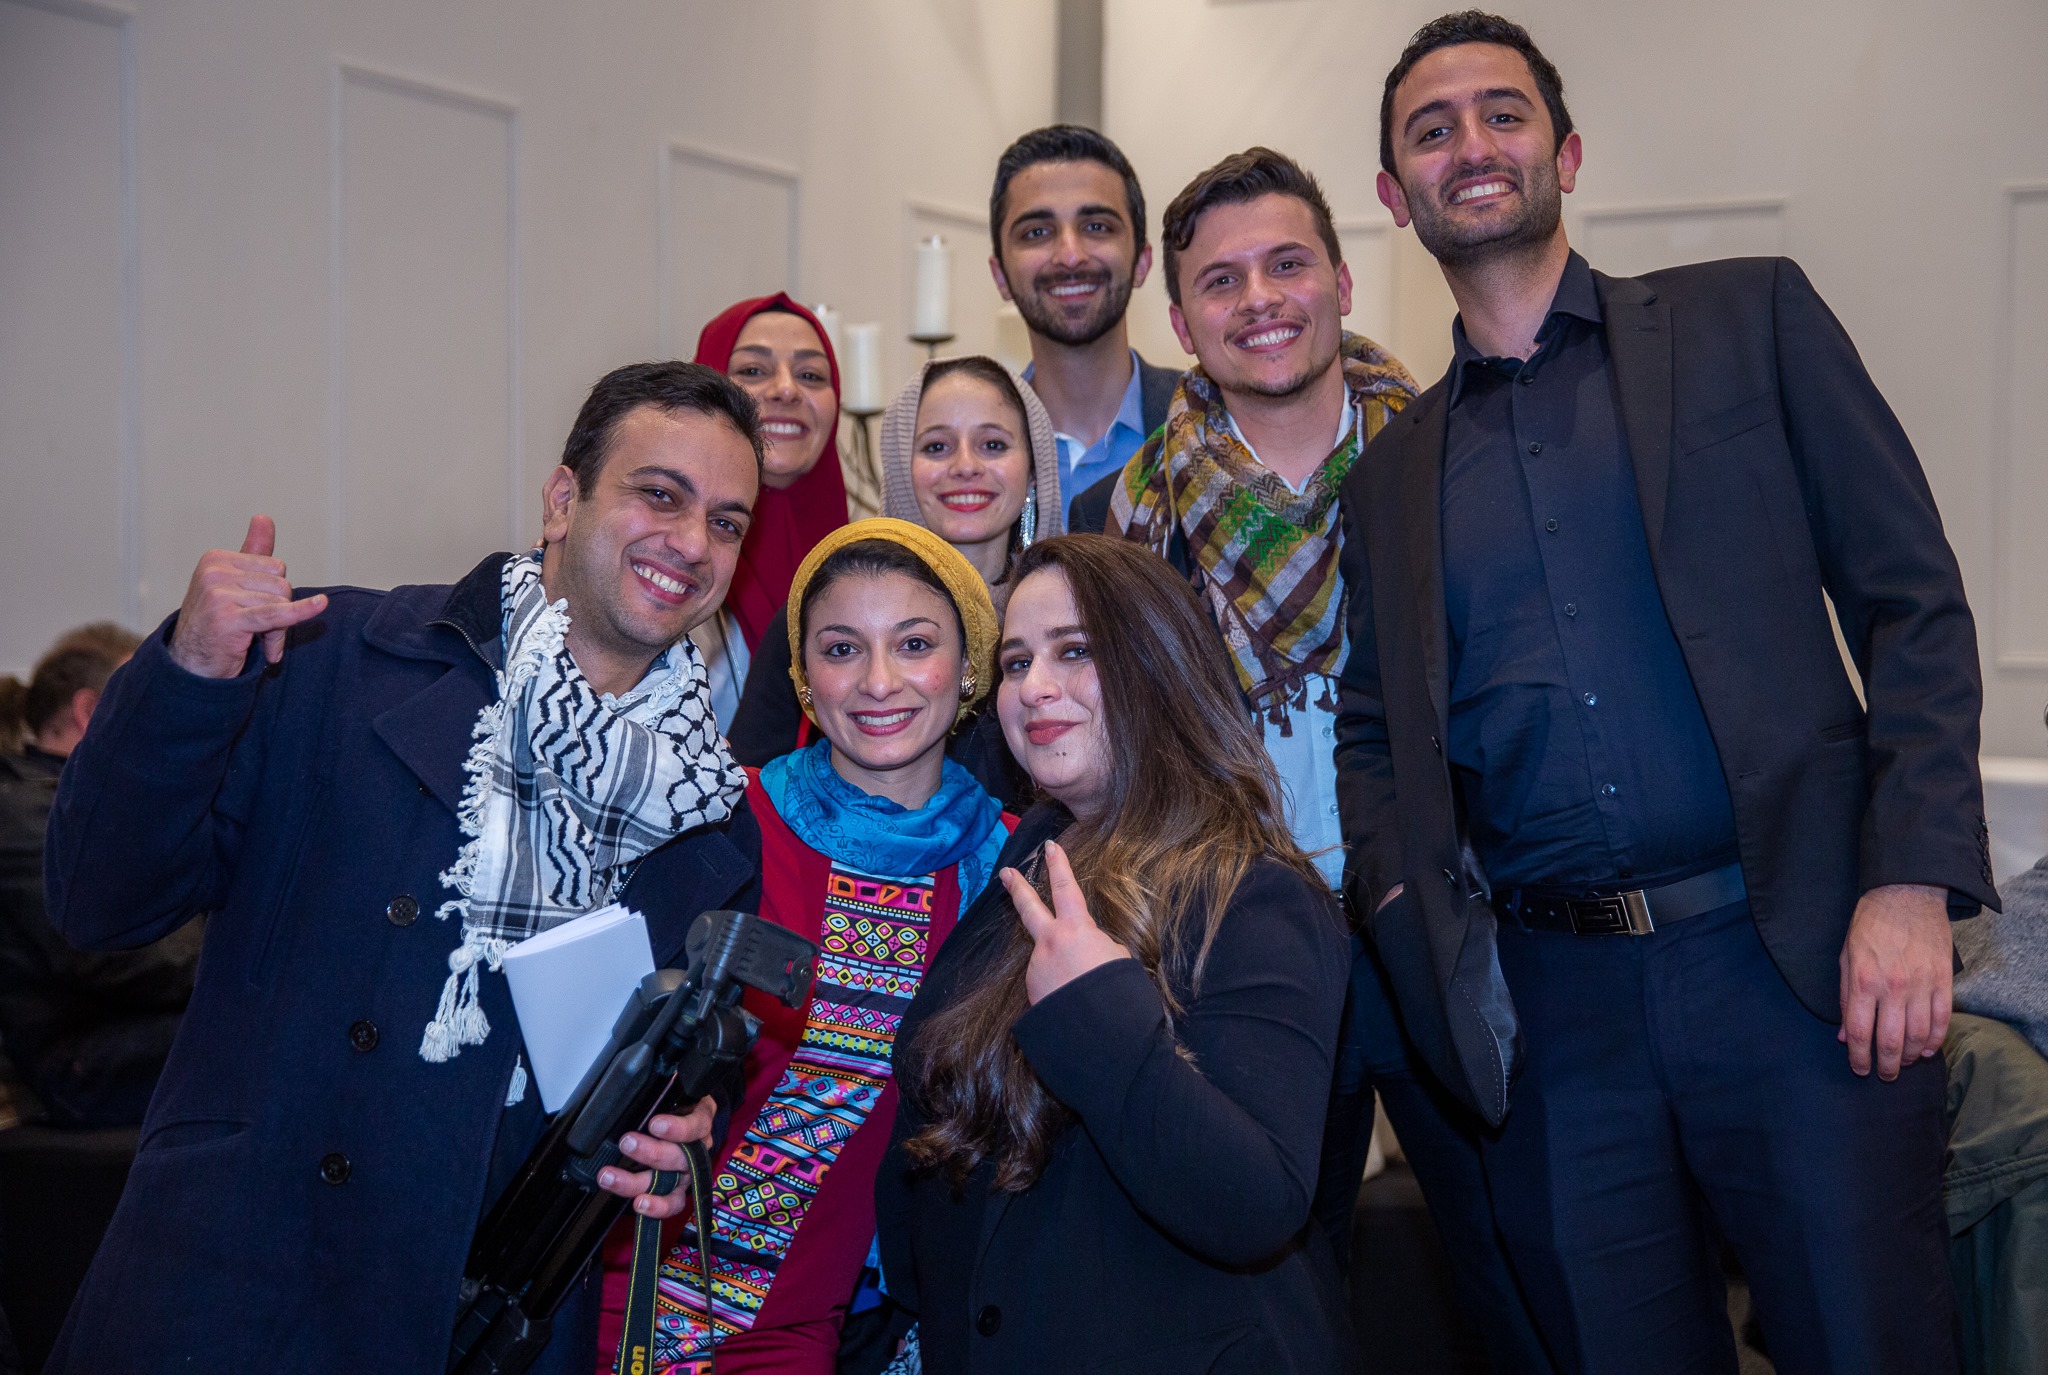 Group of young Palestniians with Kuffiyehs and traditional Palestinian dress